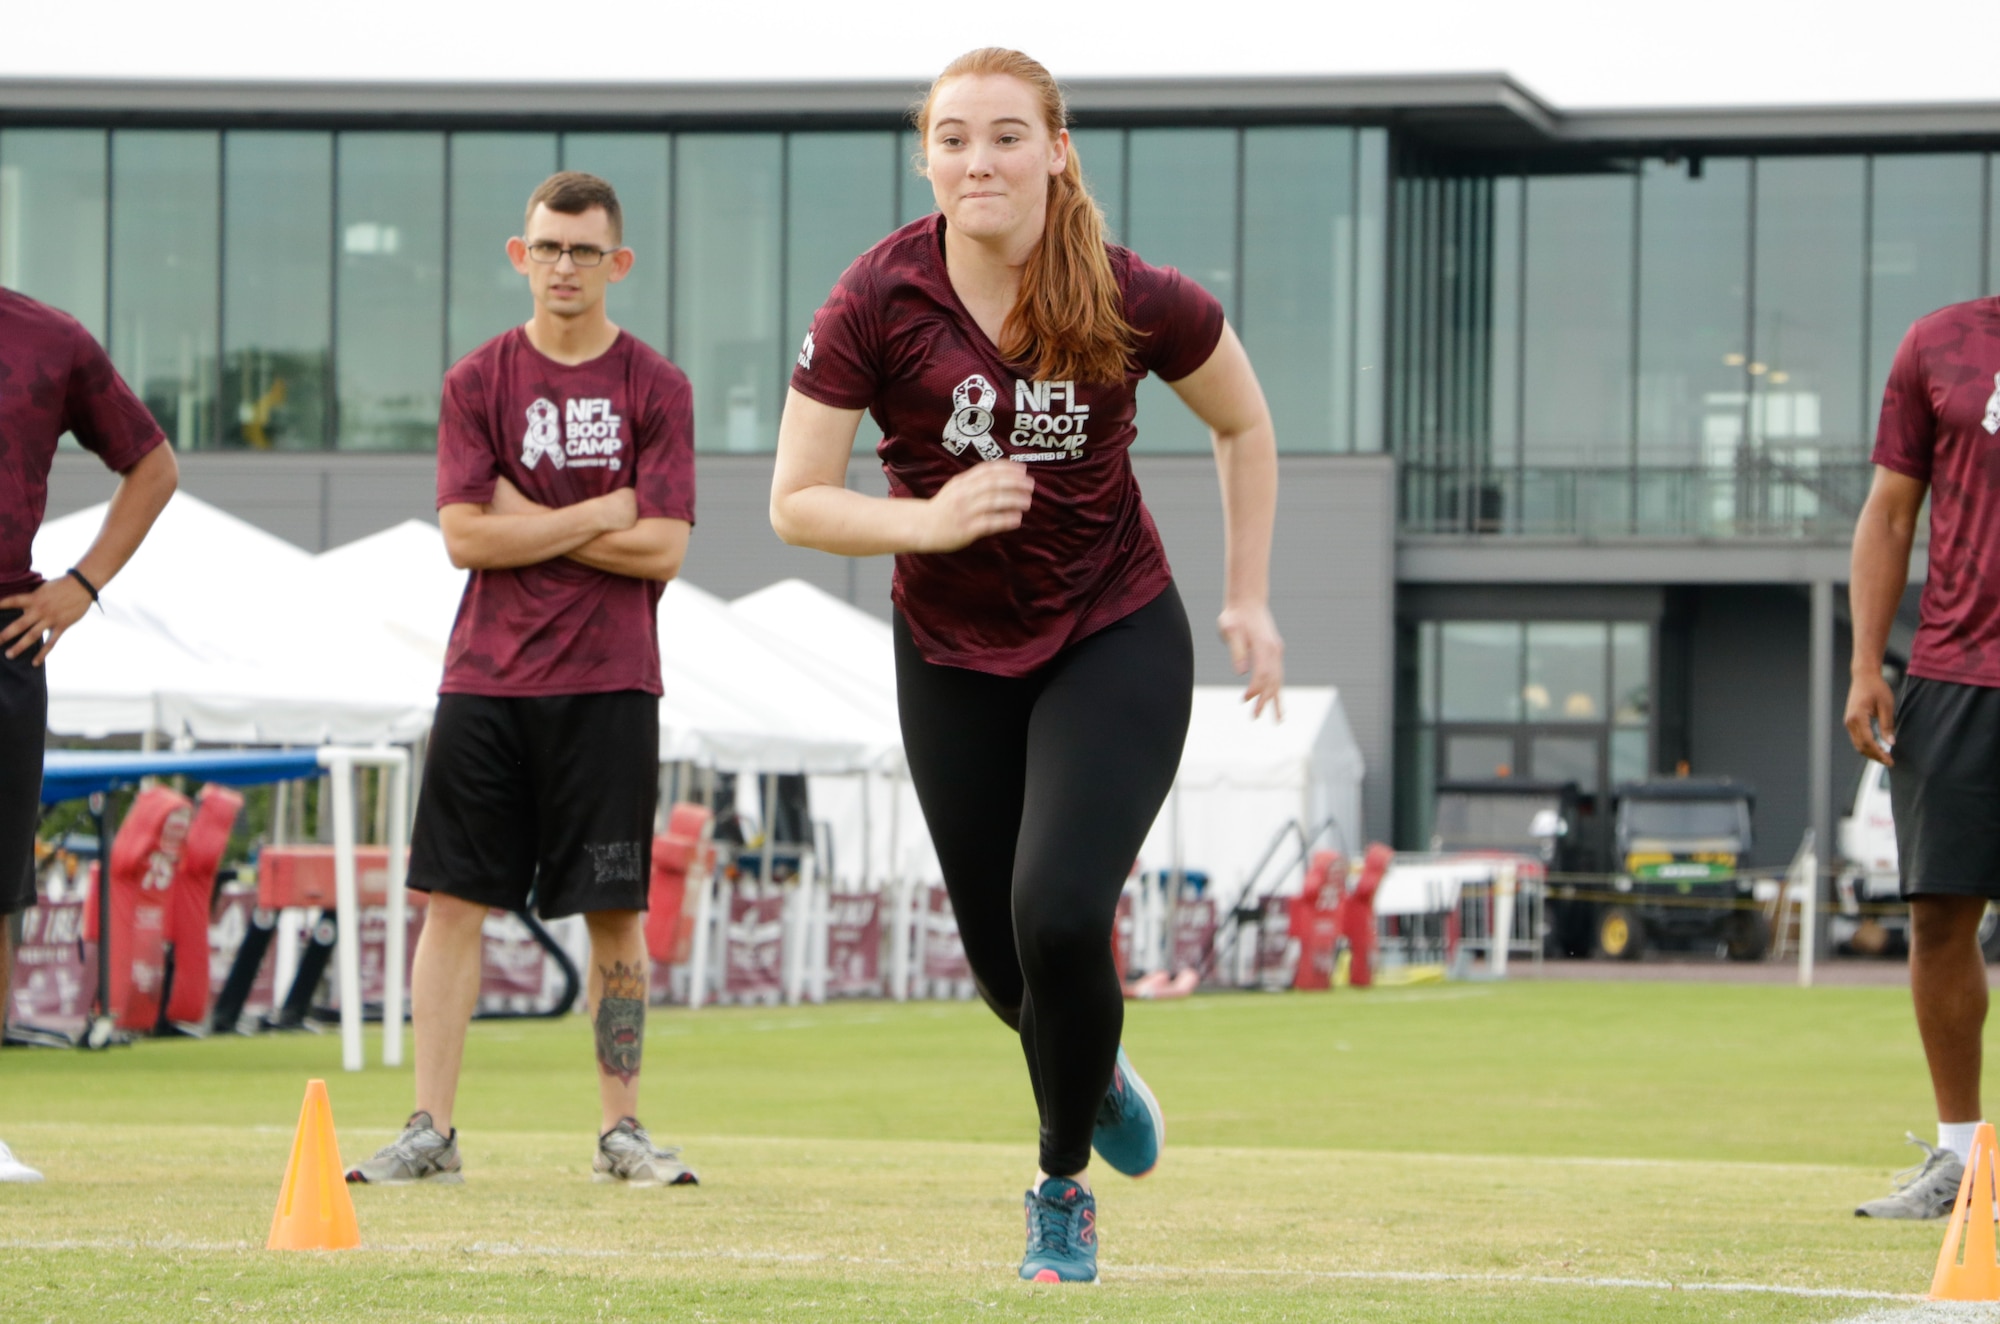 U.S. Air Force Airman 1st Class Alexandra Nason, 363rd Intelligence, Surveillance and Reconnaissance Group, participates in the 40 yard dash during the Salute to Service military appreciation event at the Washington Redskins’ Bon Secours Training Camp in Richmond, Virginia, Aug. 2, 2017.